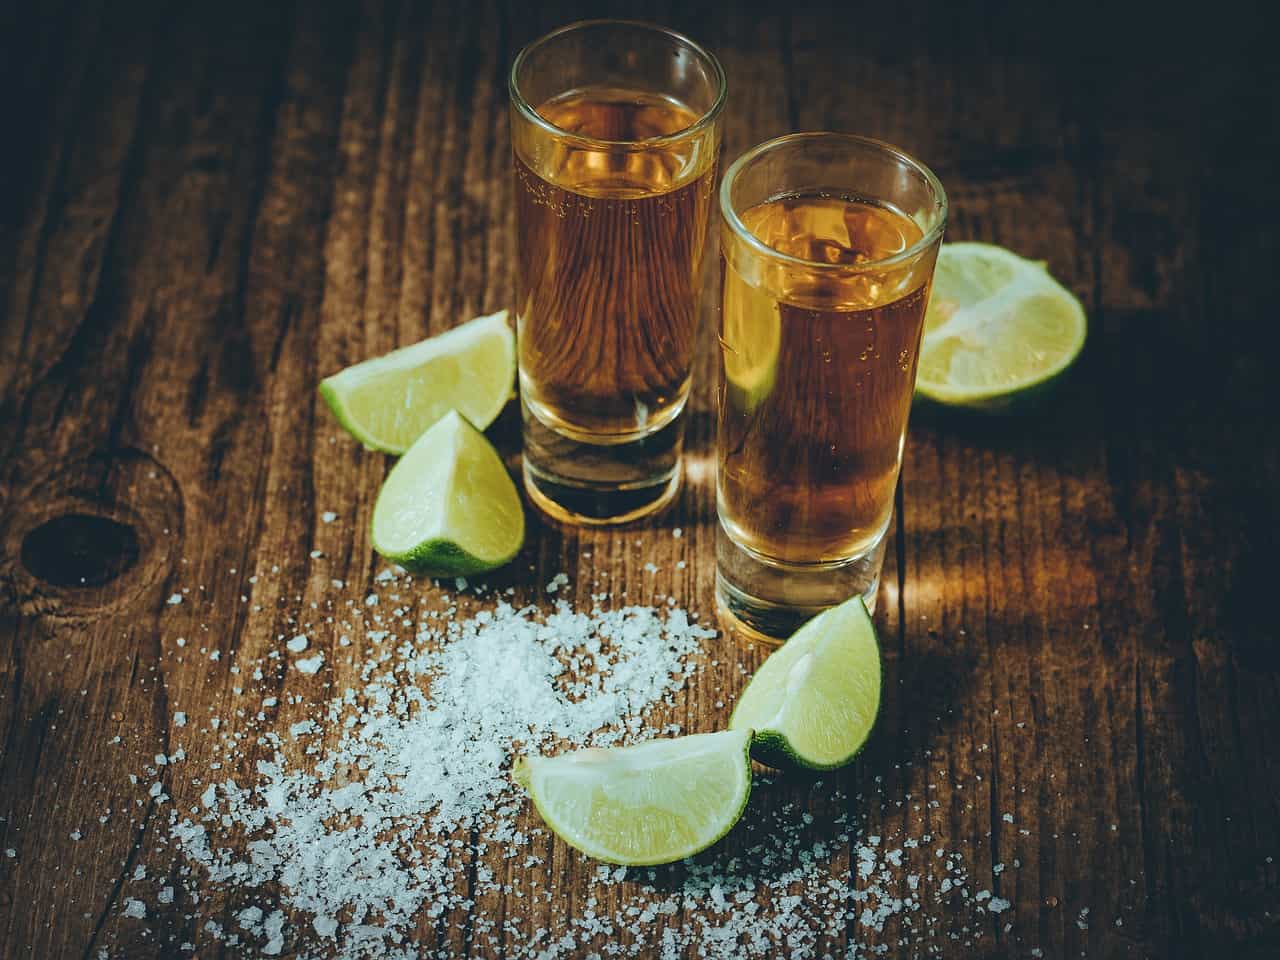 How is Tequila made